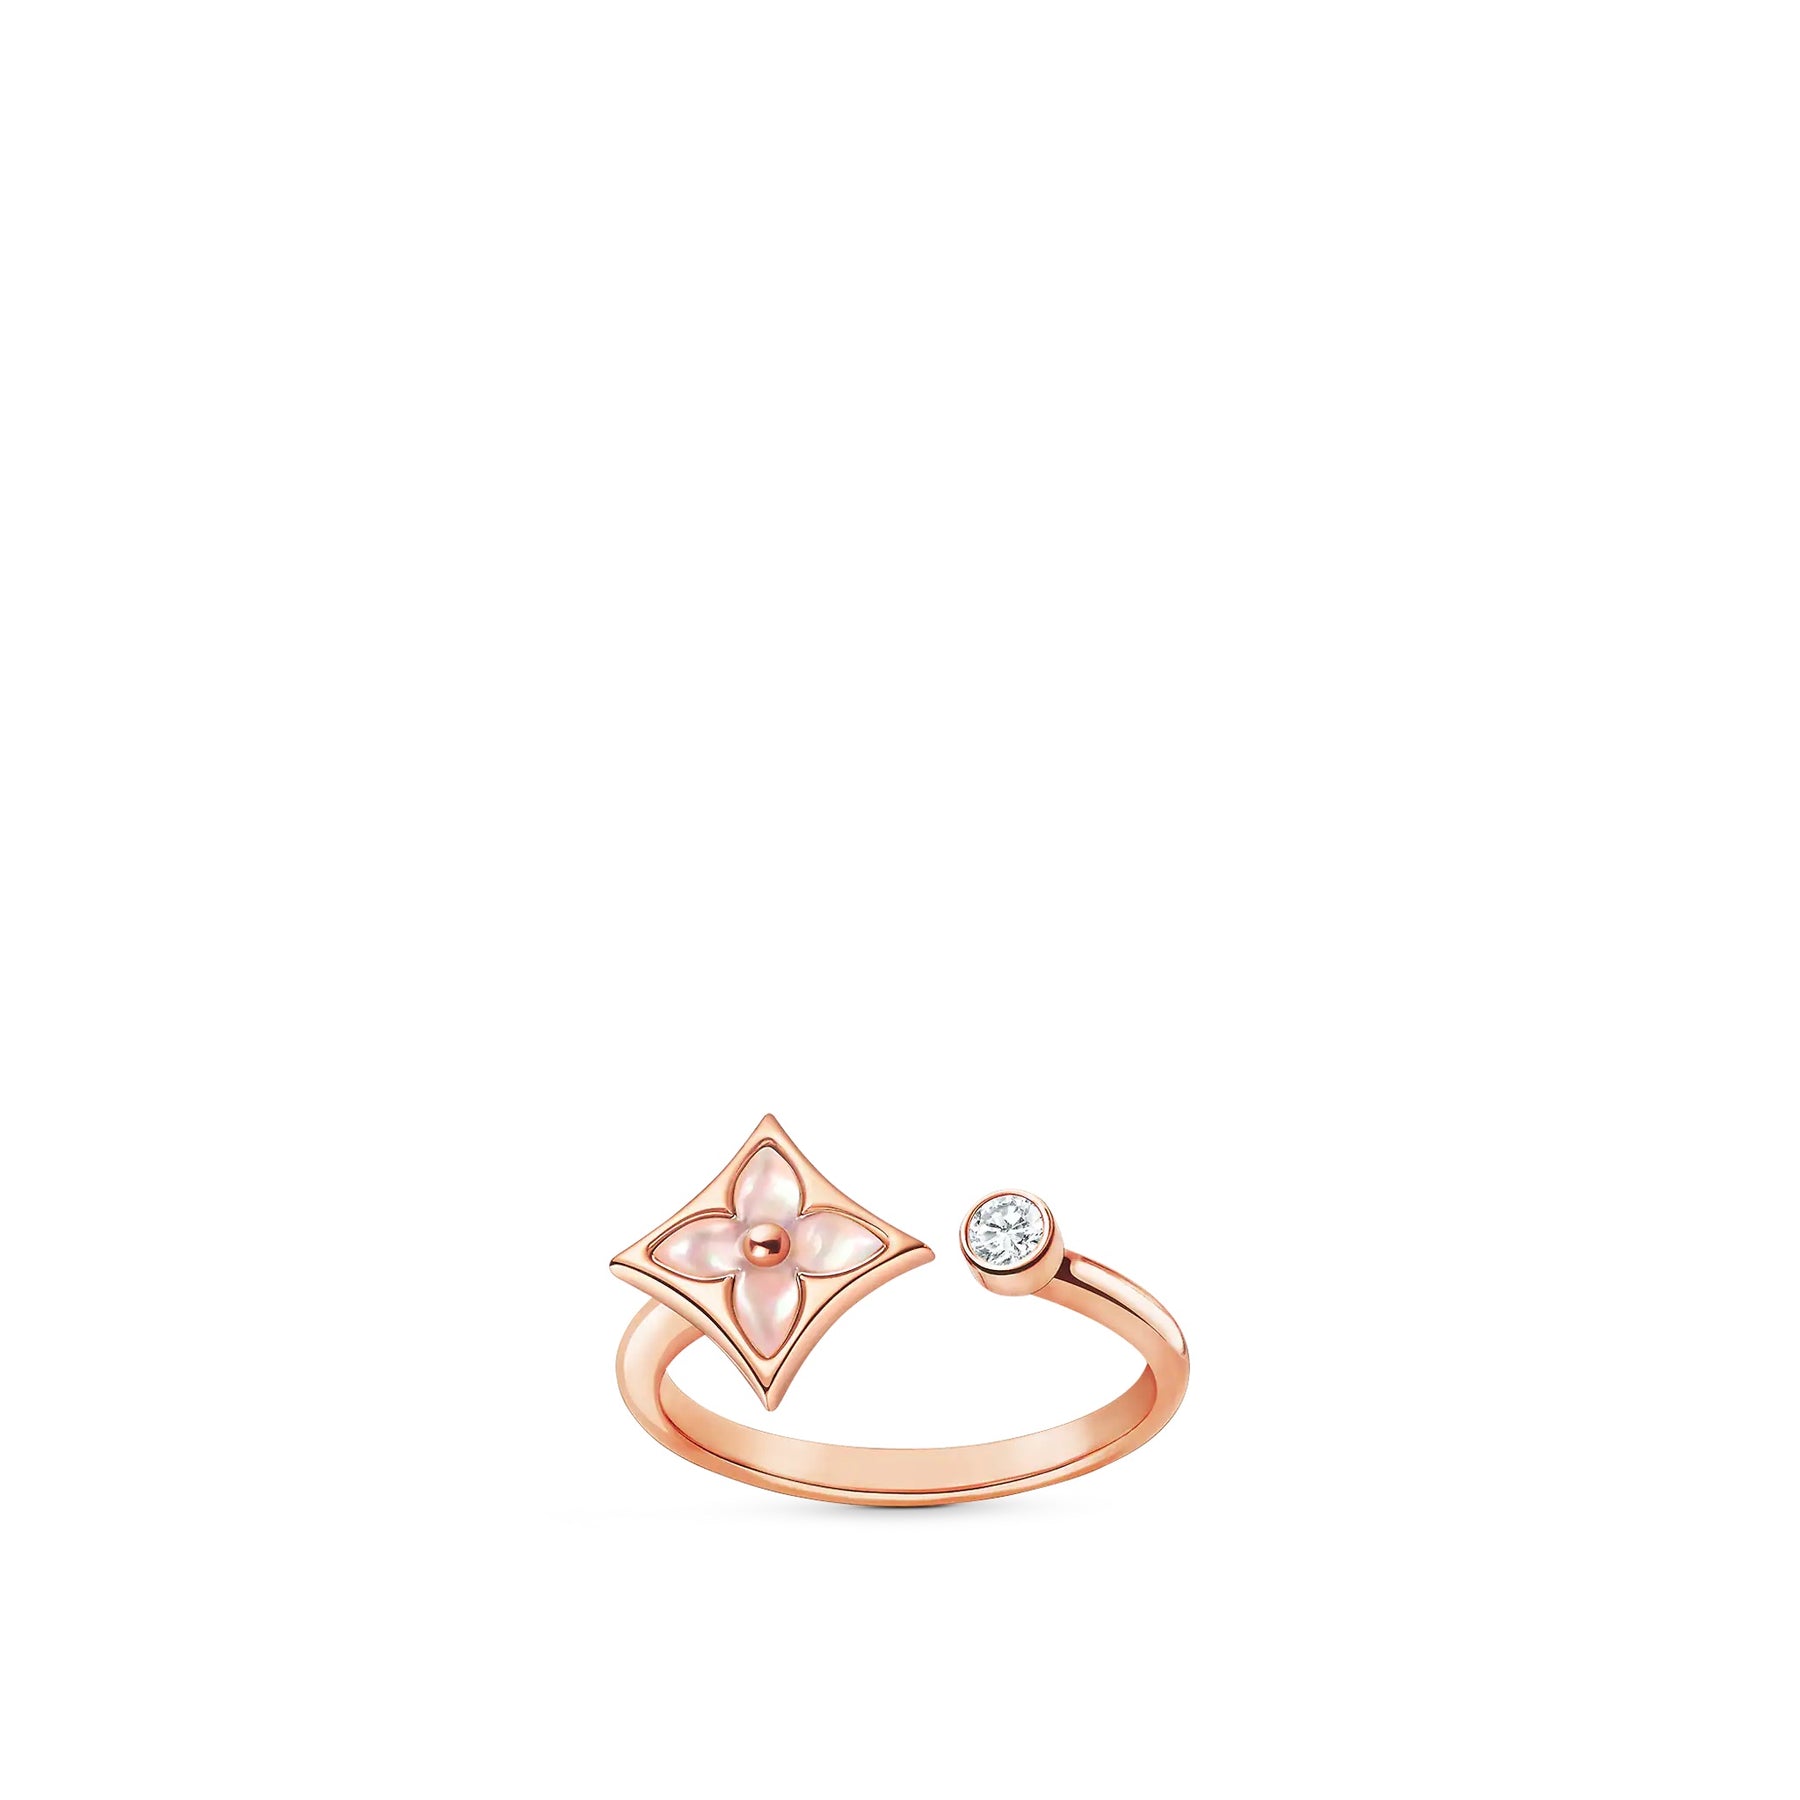 Louis Vuitton Idylle Blossom Twist Bangle - ShopifieD by IaM